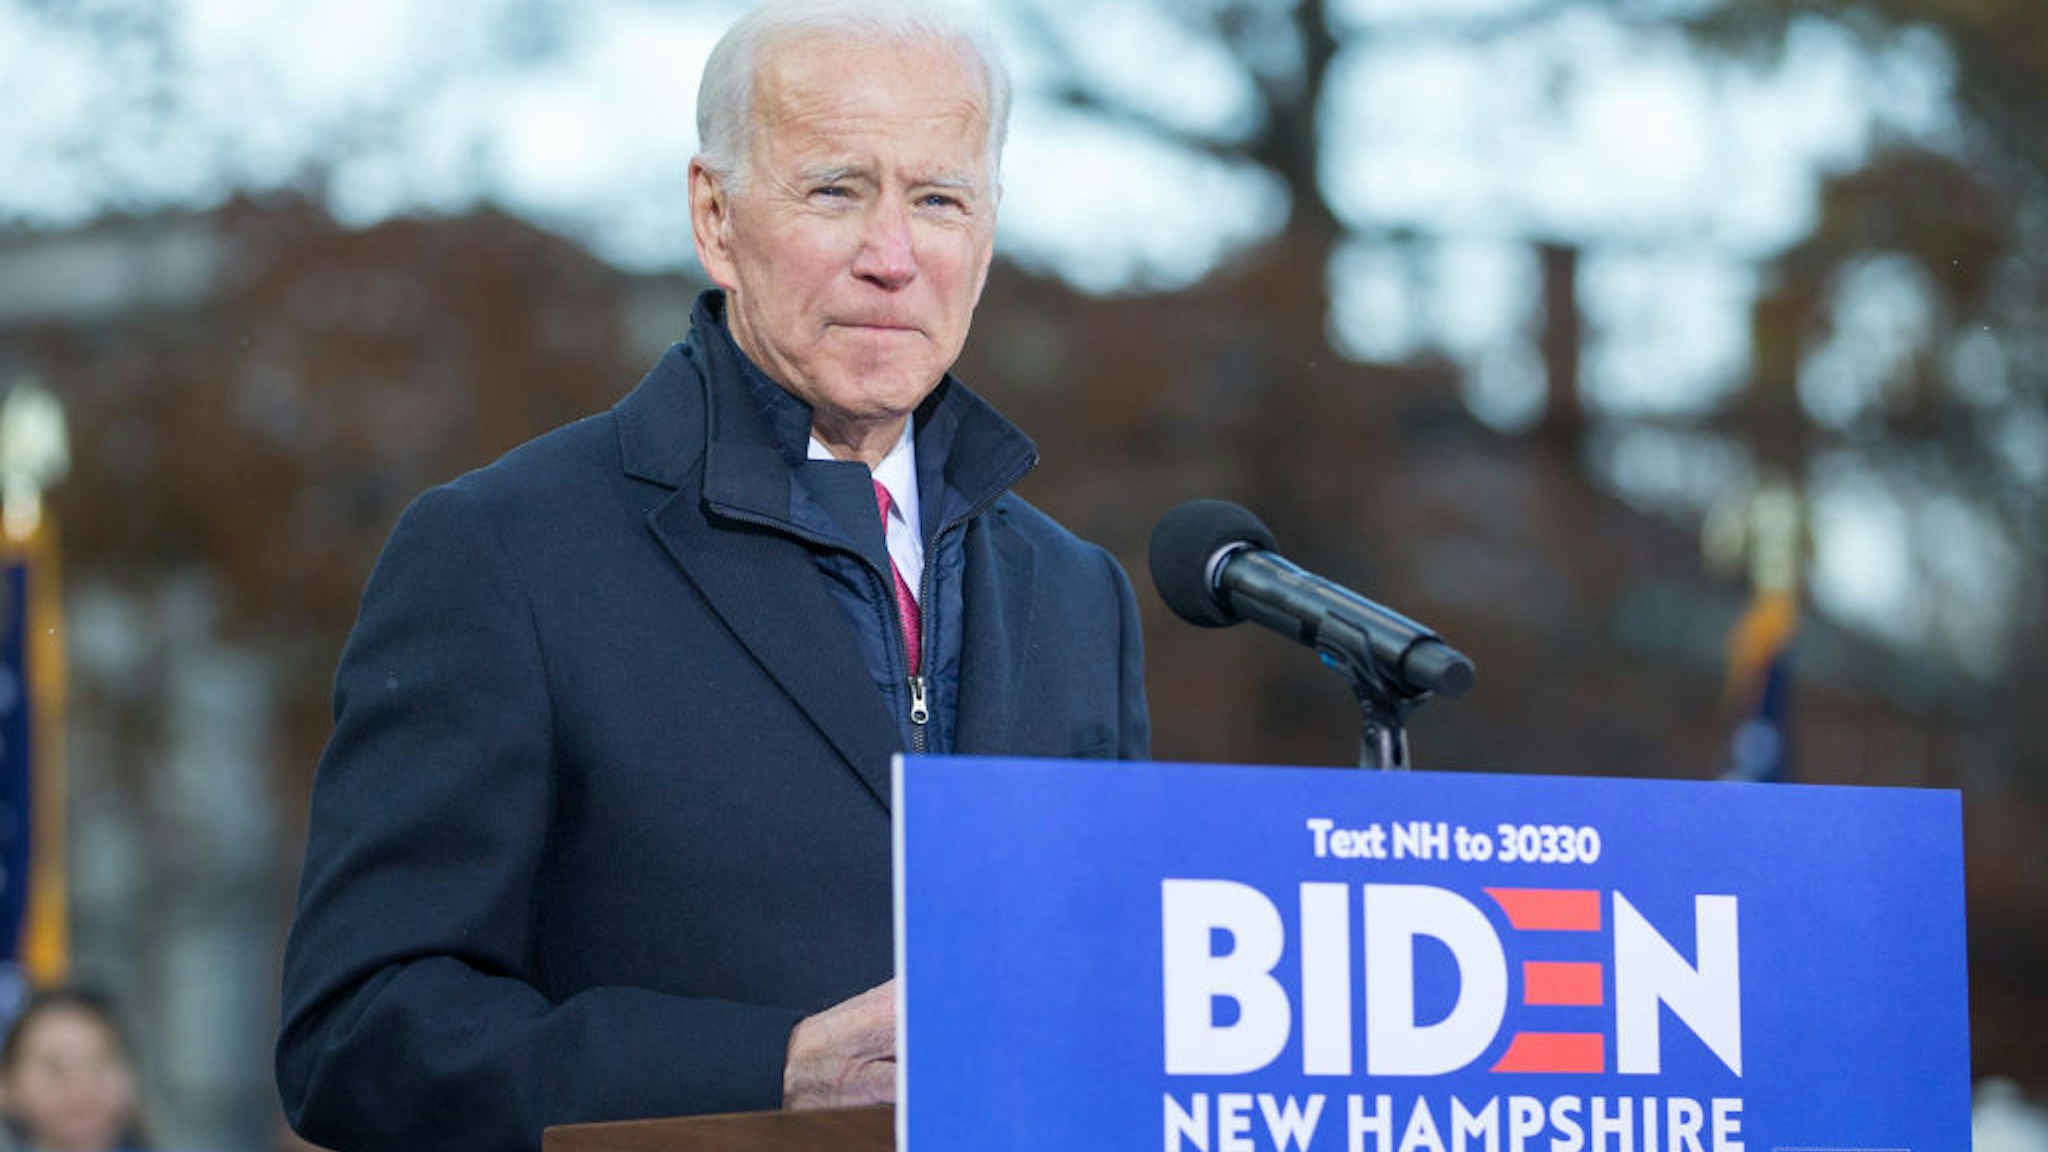 Democratic presidential candidate, former vice President Joe Biden speaks during a rally after he signed his official paperwork for the New Hampshire Primary at the New Hampshire State House on November 8, 2019 in Concord, New Hampshire.